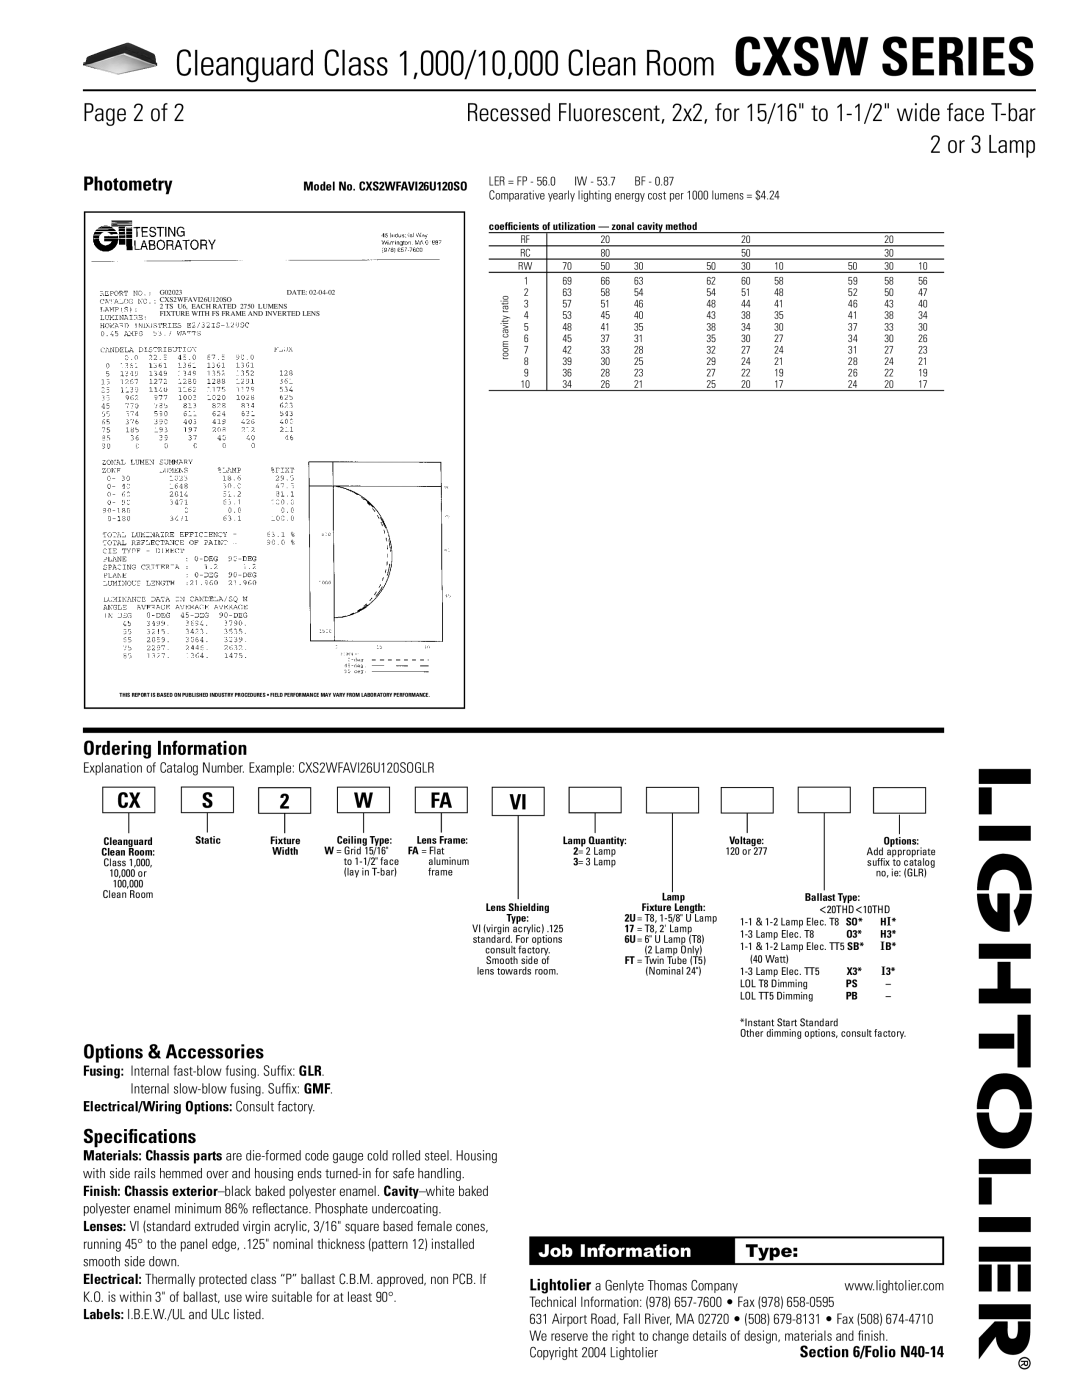 Lightolier CXSW-SERIES2X2 Page 2 of, Photometry, Ordering Information, Options & Accessories, Speciﬁcations, 2 or 3 Lamp 